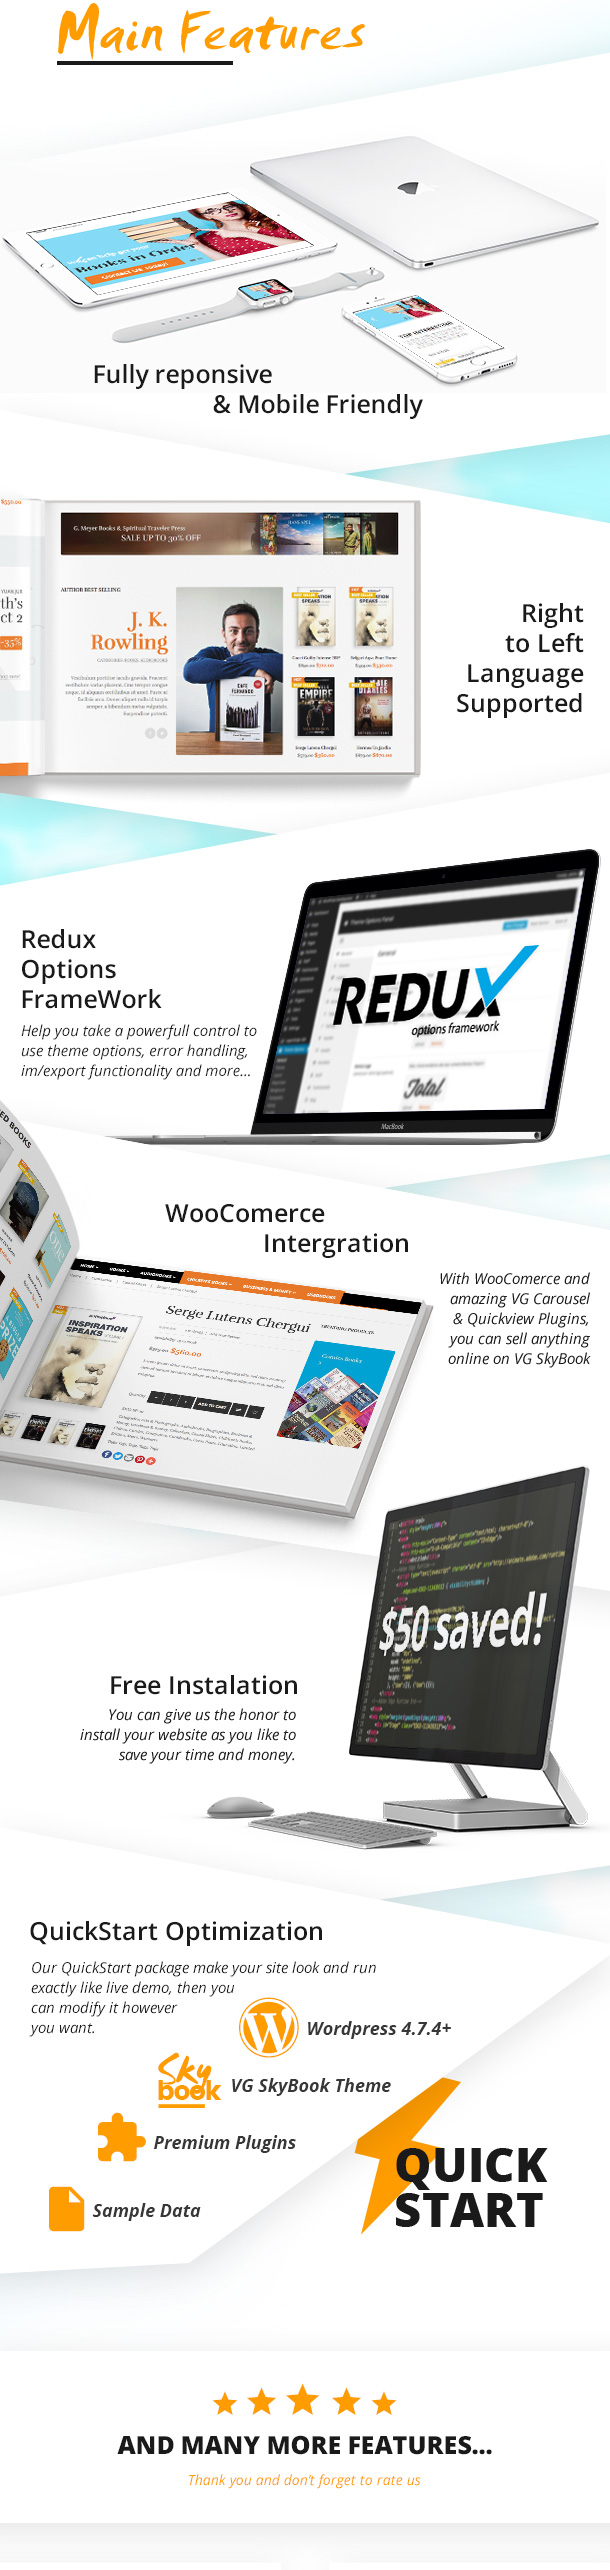 VG Skybook - WooCommerce Theme For Book Store - 18